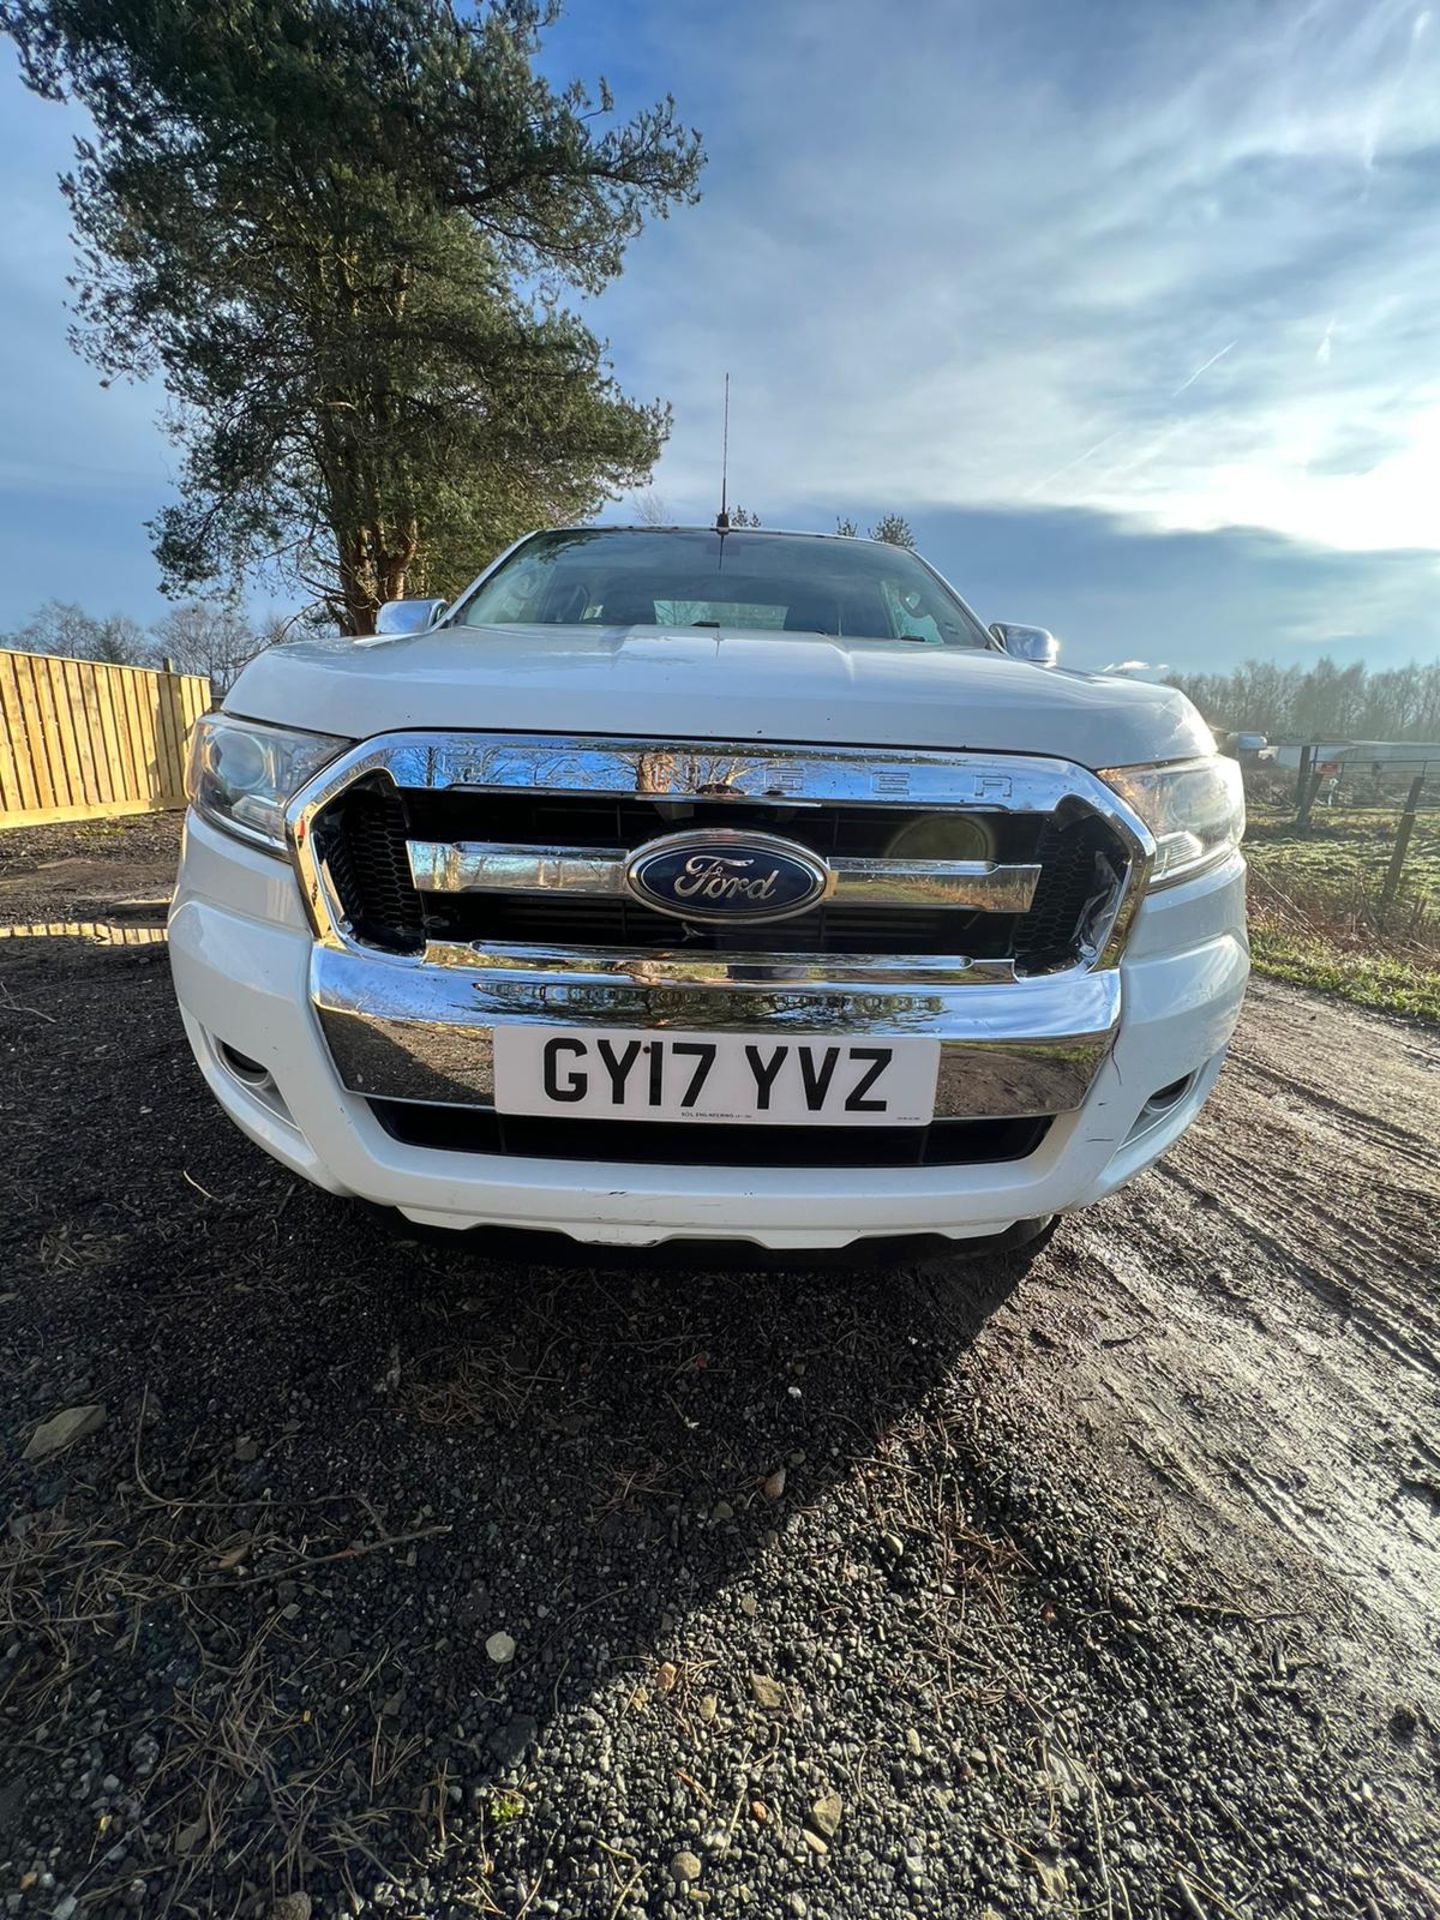 2017 FORD RANGER KING CAB EXSTRA CAB CAB AND HALF - Image 13 of 19